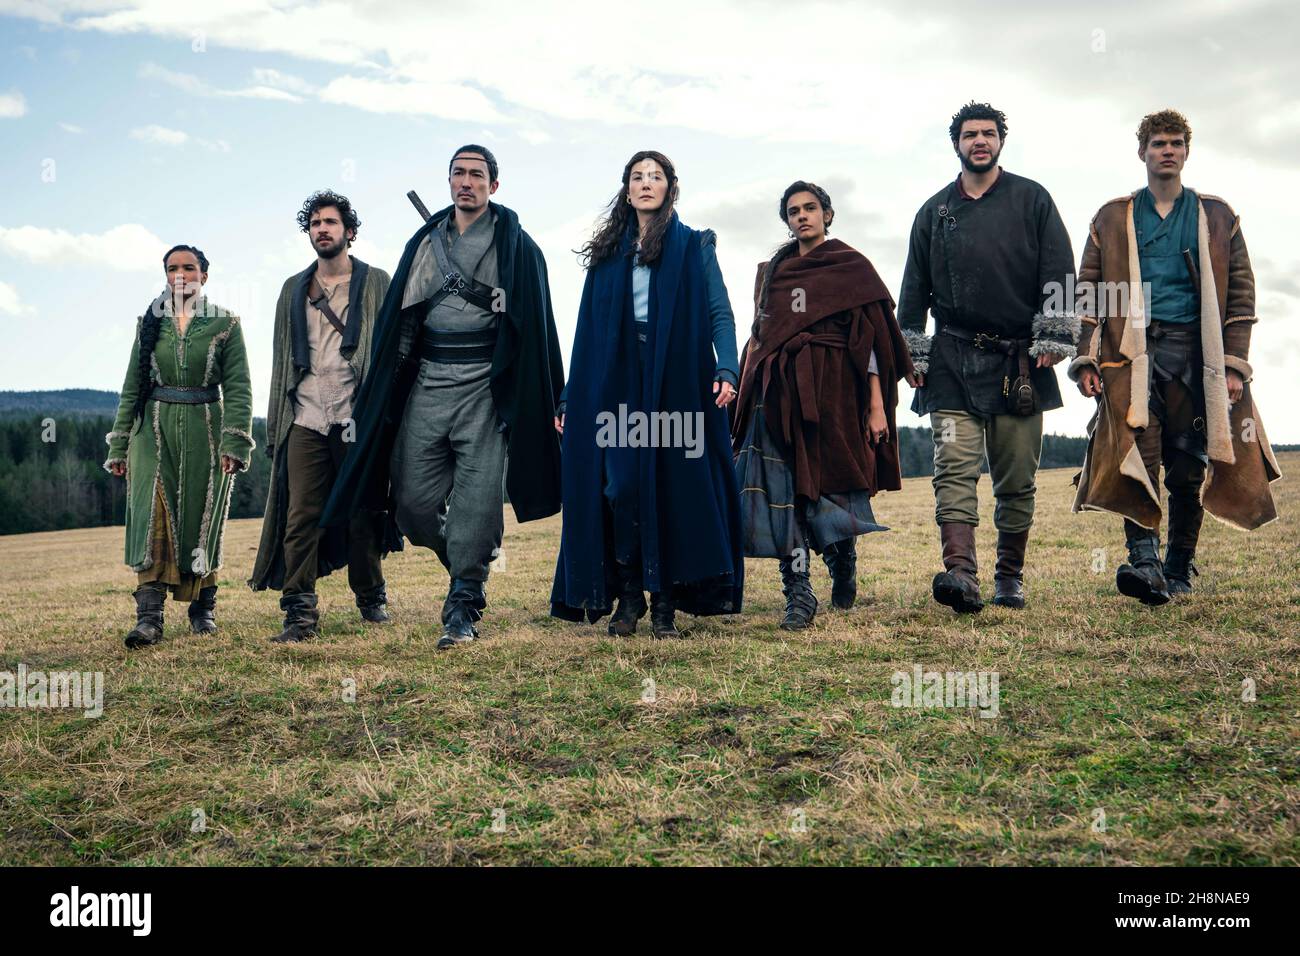 ROSAMUND PIKE, DANIEL HENNEY, MADELEINE MADDEN, ZOE ROBINS, JOSHA STRADOWSKI, BARNEY HARRIS and MARCUS RUTHERFORD in THE WHEEL OF TIME (2021), directed by UTA BRIESEWITZ and WAYNE YIP. Credit: Sony Pictures Television / Amazon Studios / Album Stock Photo